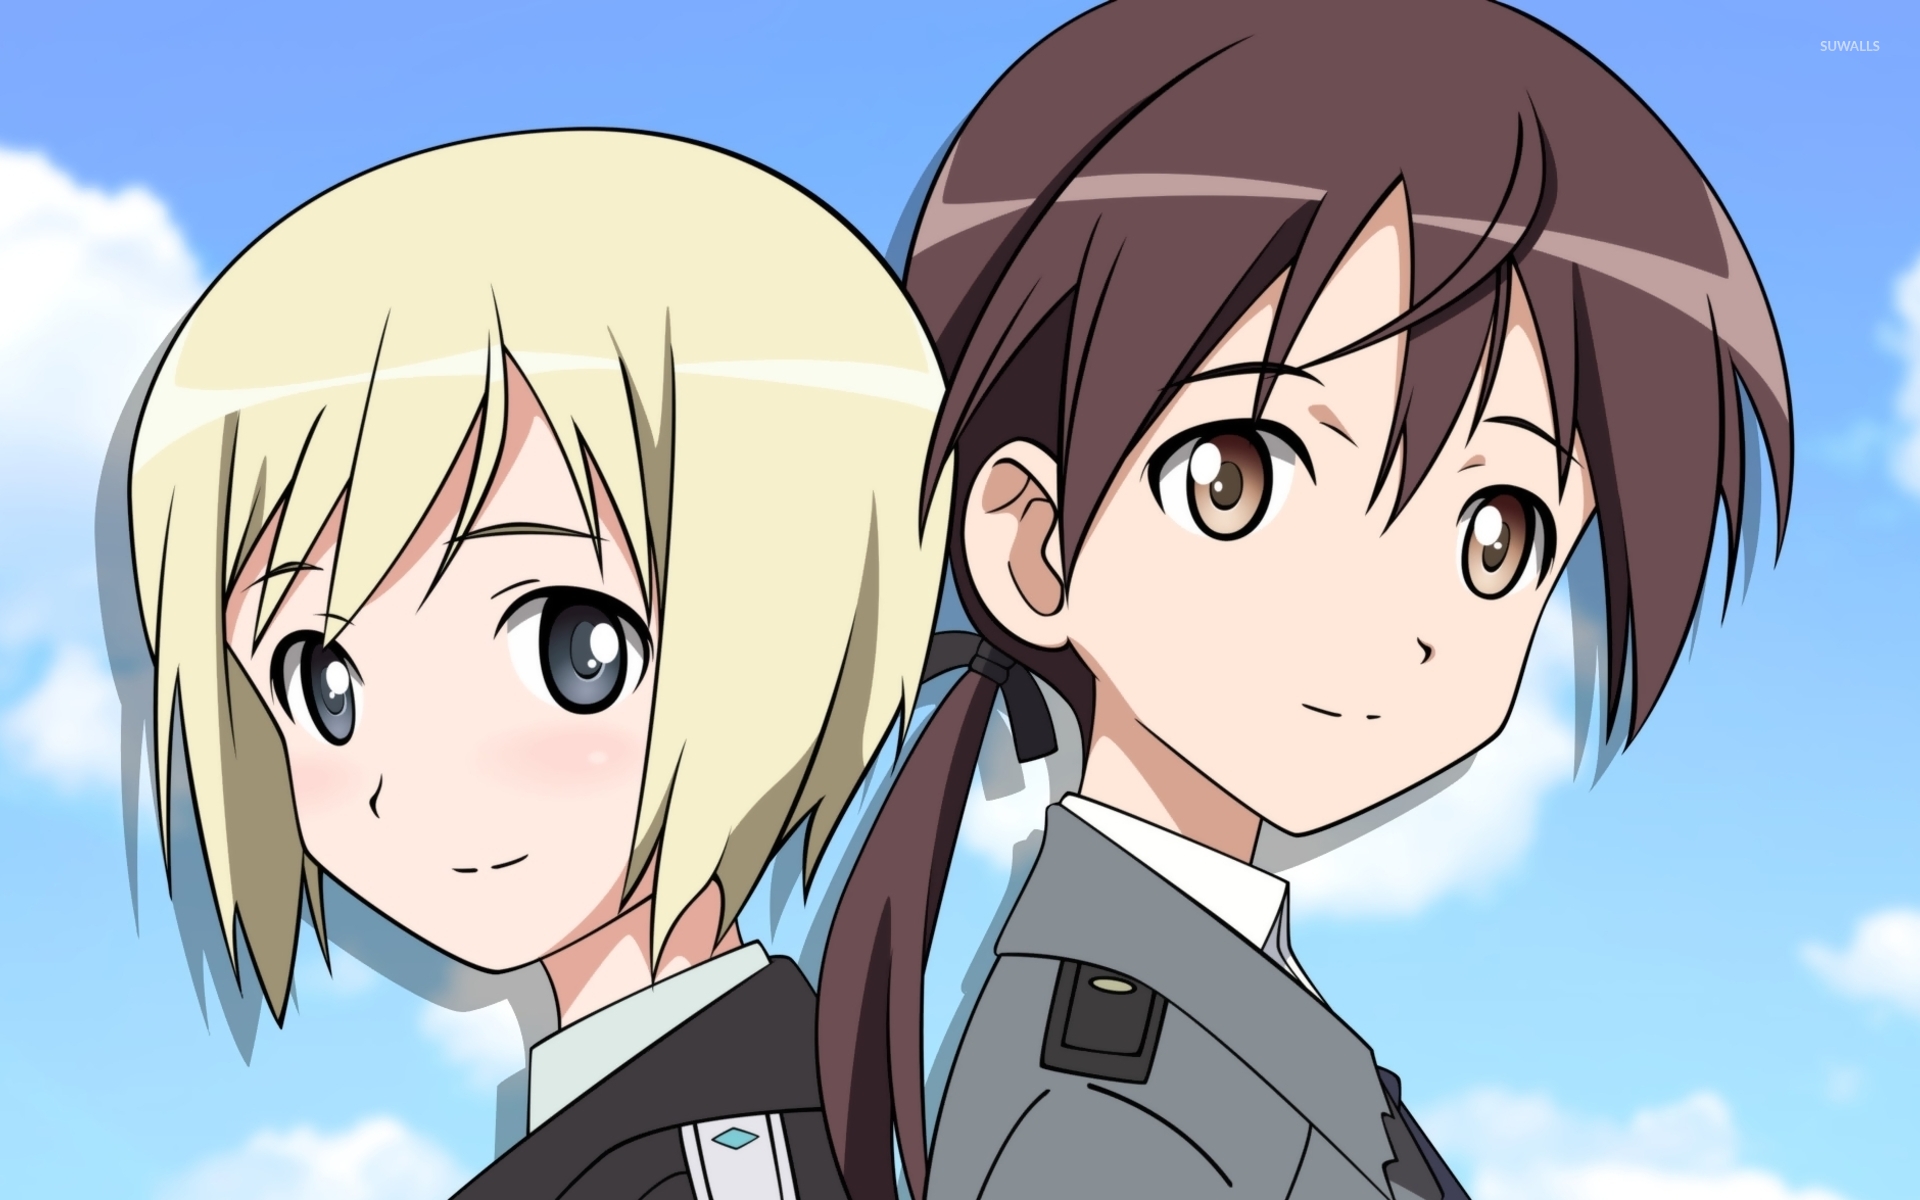 Strike Witches Wallpaper Anime